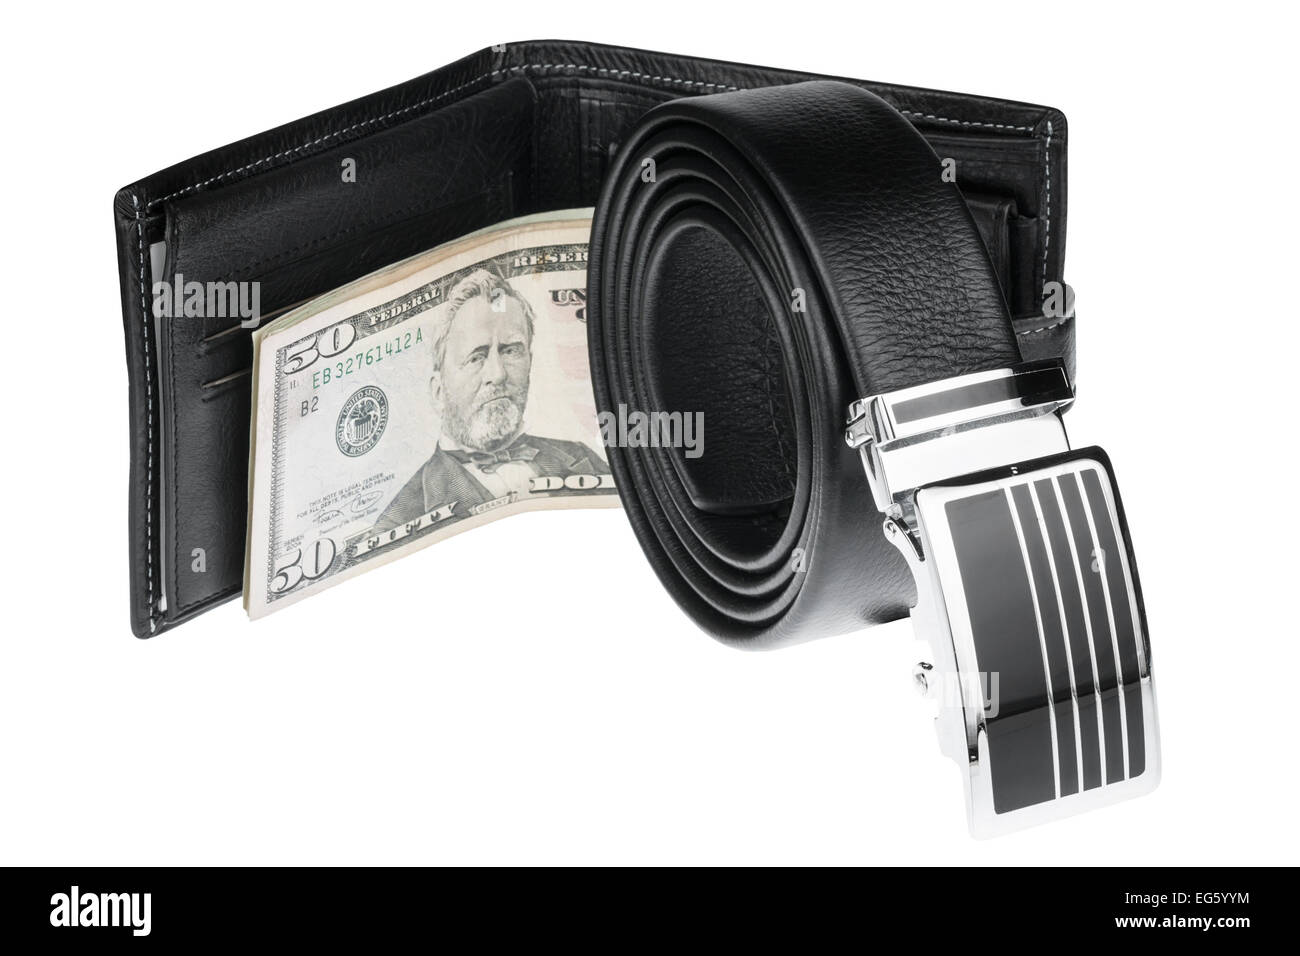 Men's belt, wallet with money, isolated on white background Stock Photo